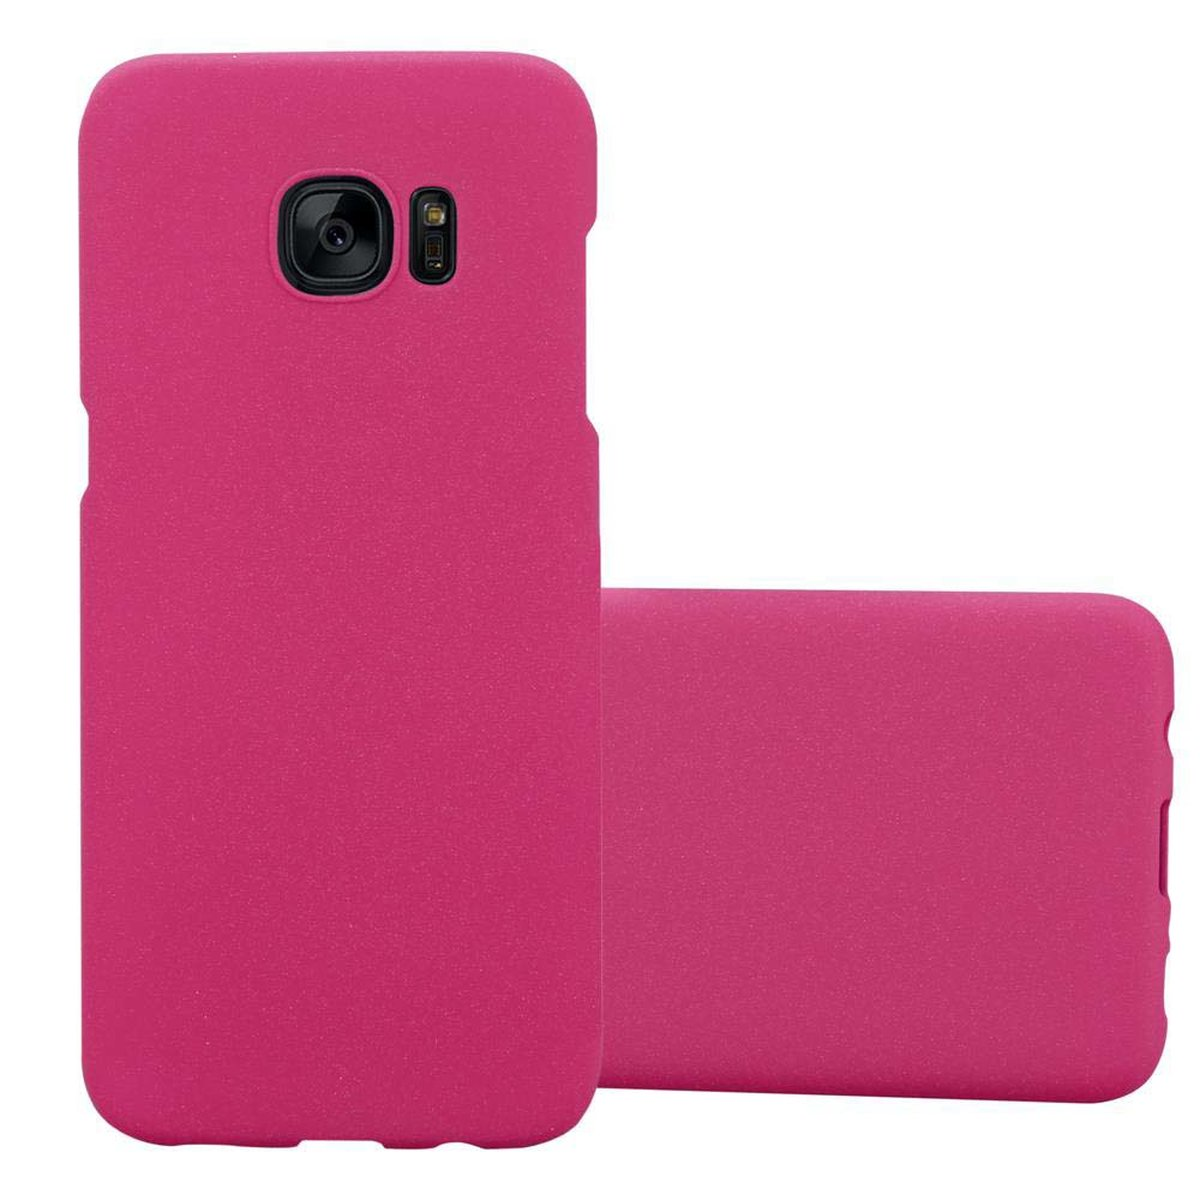 Case im Hard PINK S7 Frosty EDGE, Samsung, Style, Backcover, CADORABO Galaxy FROSTY Hülle